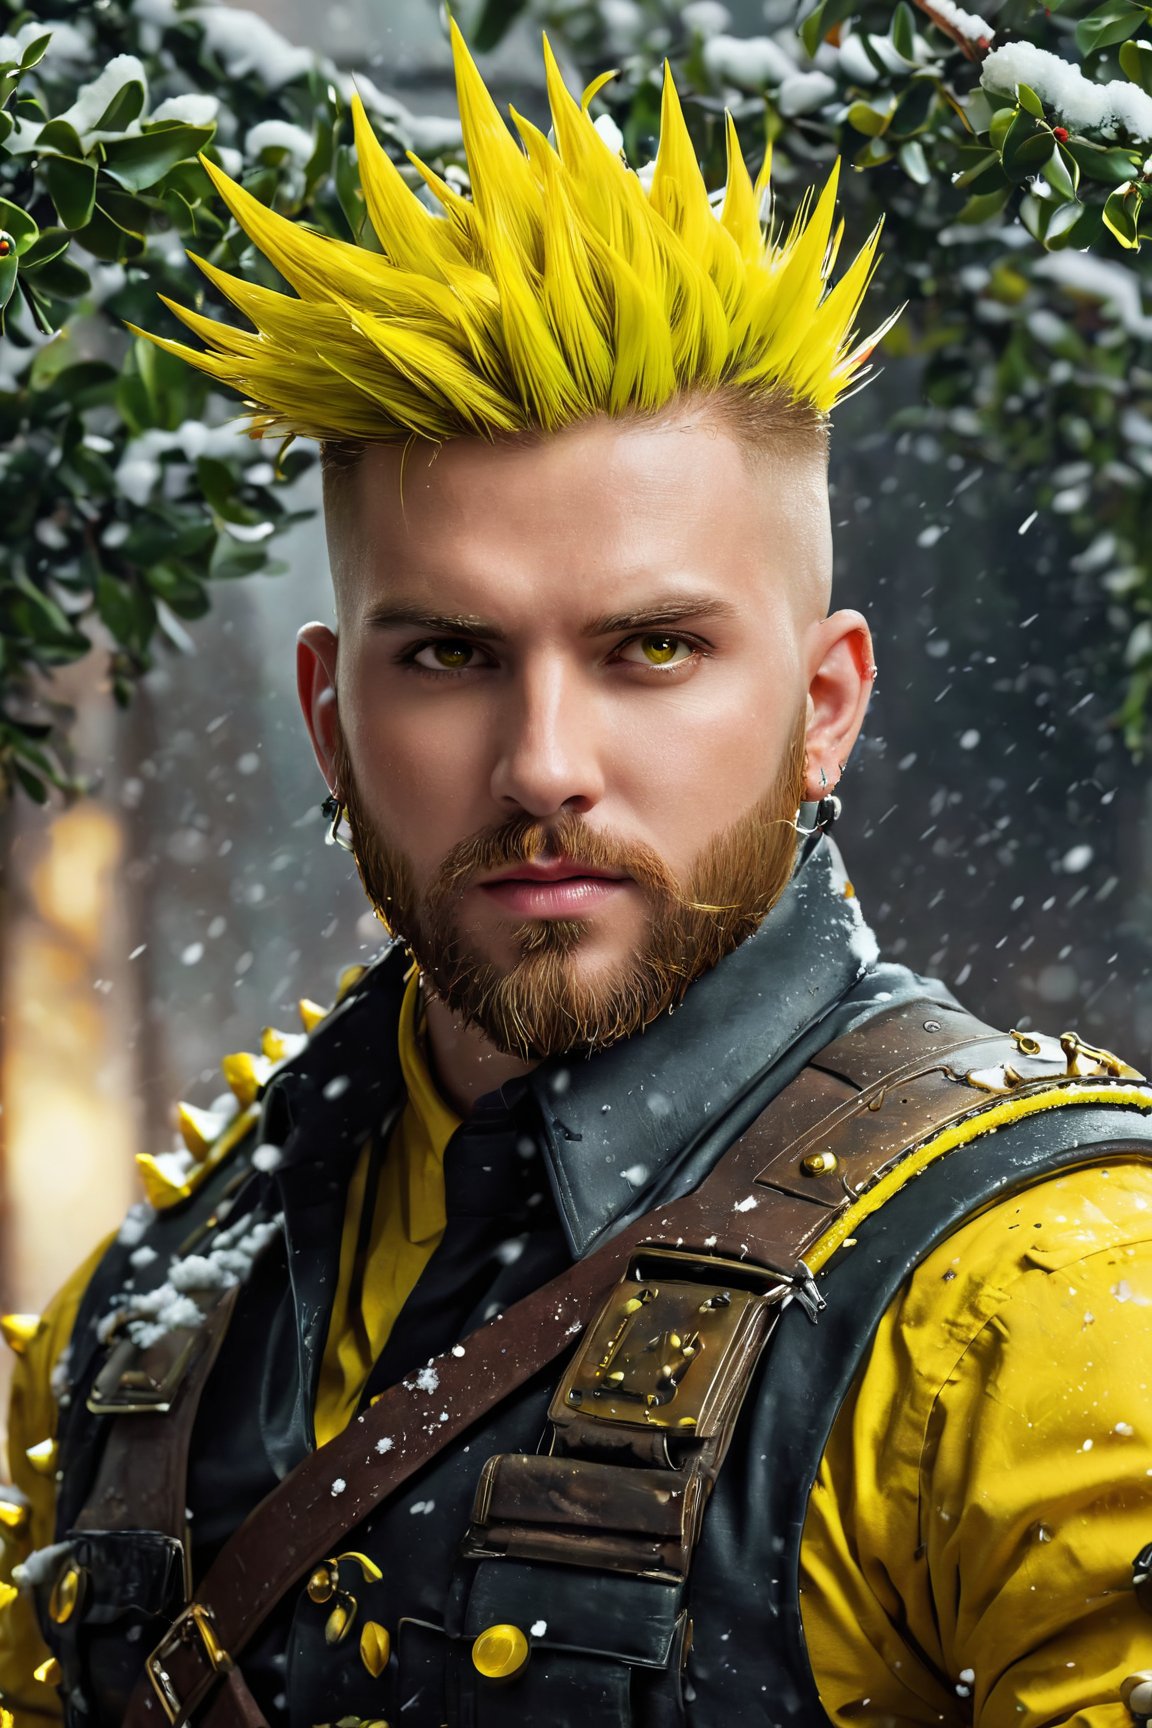 an (extremely detailed masterpiece) of one man ((1boy)) Mercenary with his (yellow spiked punk hair style,  sides shaved) muscles and (five o'clock shadow,  scruffy beard) wearing a ((bright yellow mercenary uniform)),  adorned in mistletoe,  (highly detailed (glowing) yellow eyes:1.2),  (toned physique:1.1),  (style-swirlmagic:1.1) (twisting swirls of dark magic),  (mistletoe:1.2),  (falling snow:1.2),  (snowflakes),  (dark fantasy style),  (moody color tones),  (soft lighting:1.2),  medium depth of field,  oil painting,  (8k UHD,  highest quality)